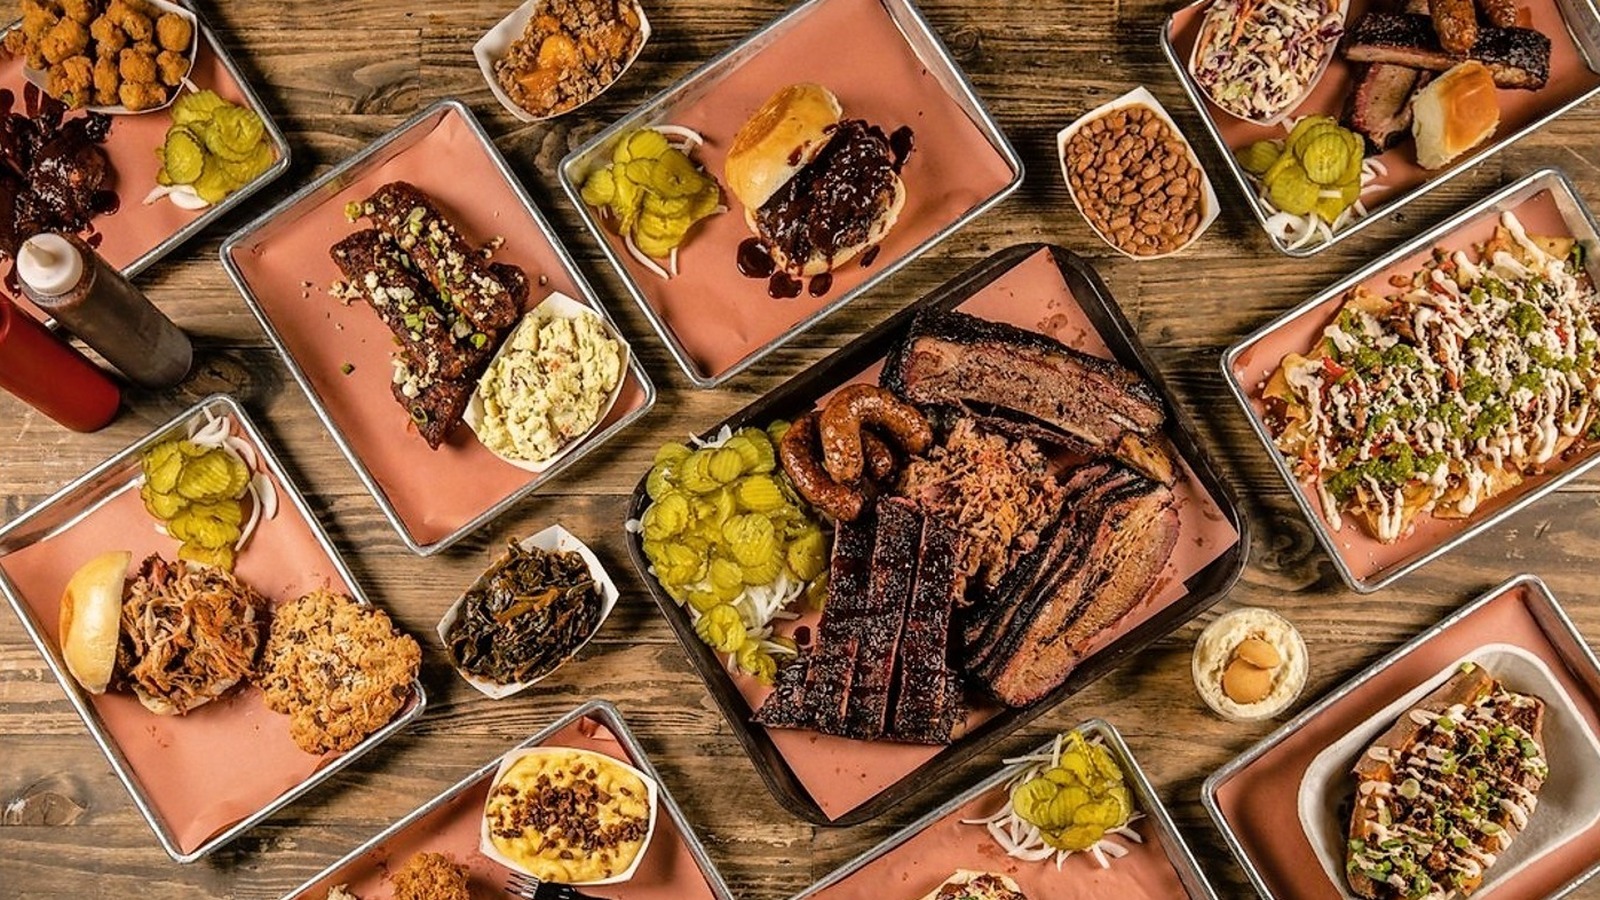 https://www.tastingtable.com/img/gallery/the-absolute-best-barbecue-restaurants-in-texas-ranked/l-intro-1683638601.jpg